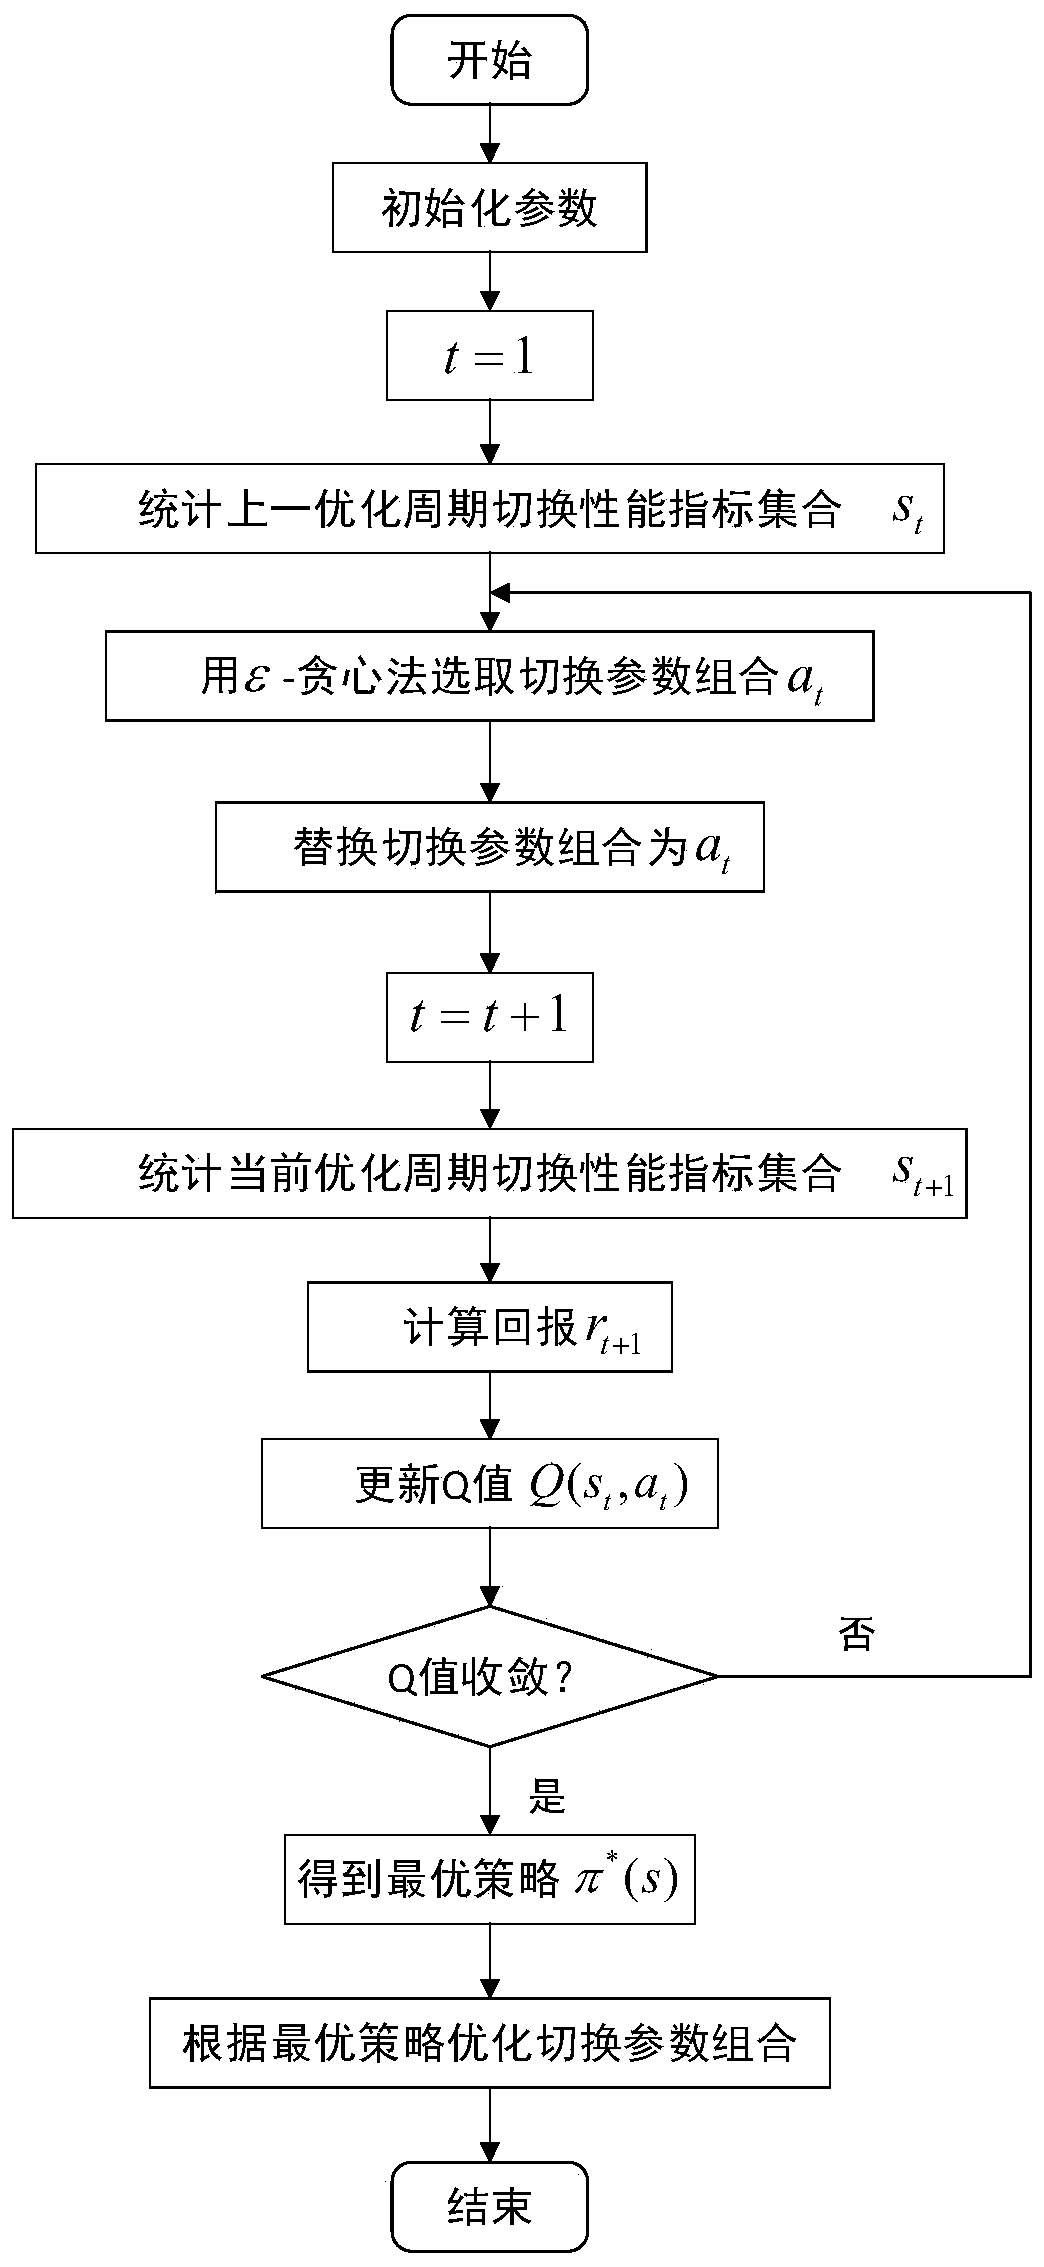 Performance switching and user service quality joint optimization method in wireless communication